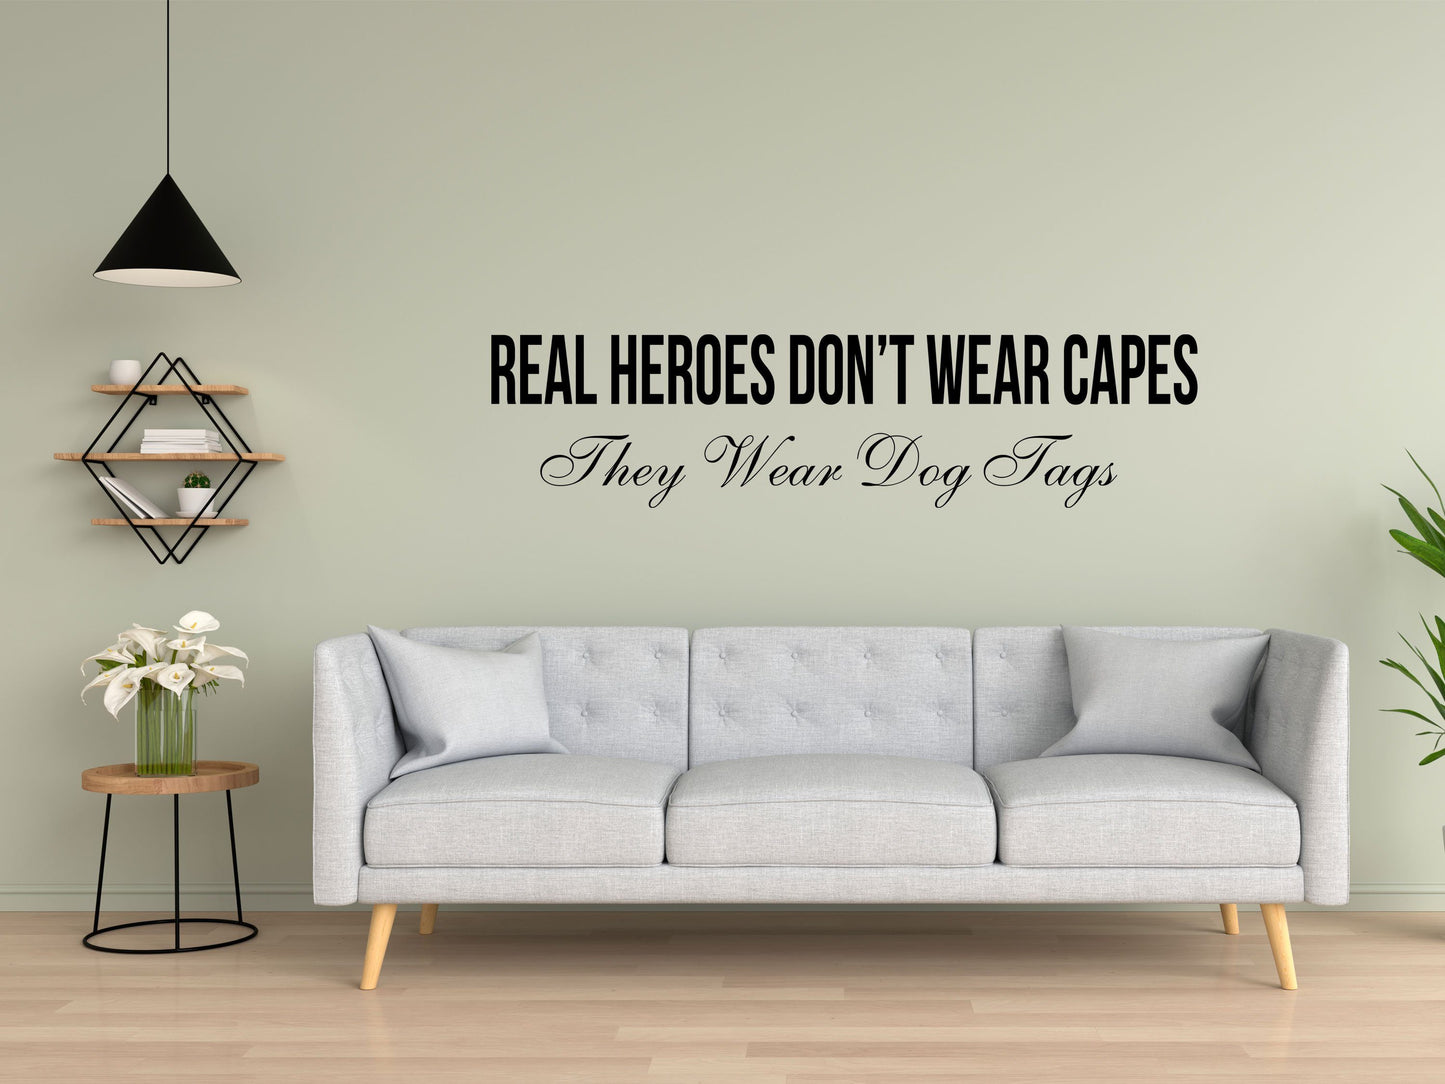 Real Heroes Don't Wear Capes Soldier - Inspirational Wall Decals Vinyl Wall Decal Inspirational Wall Signs 